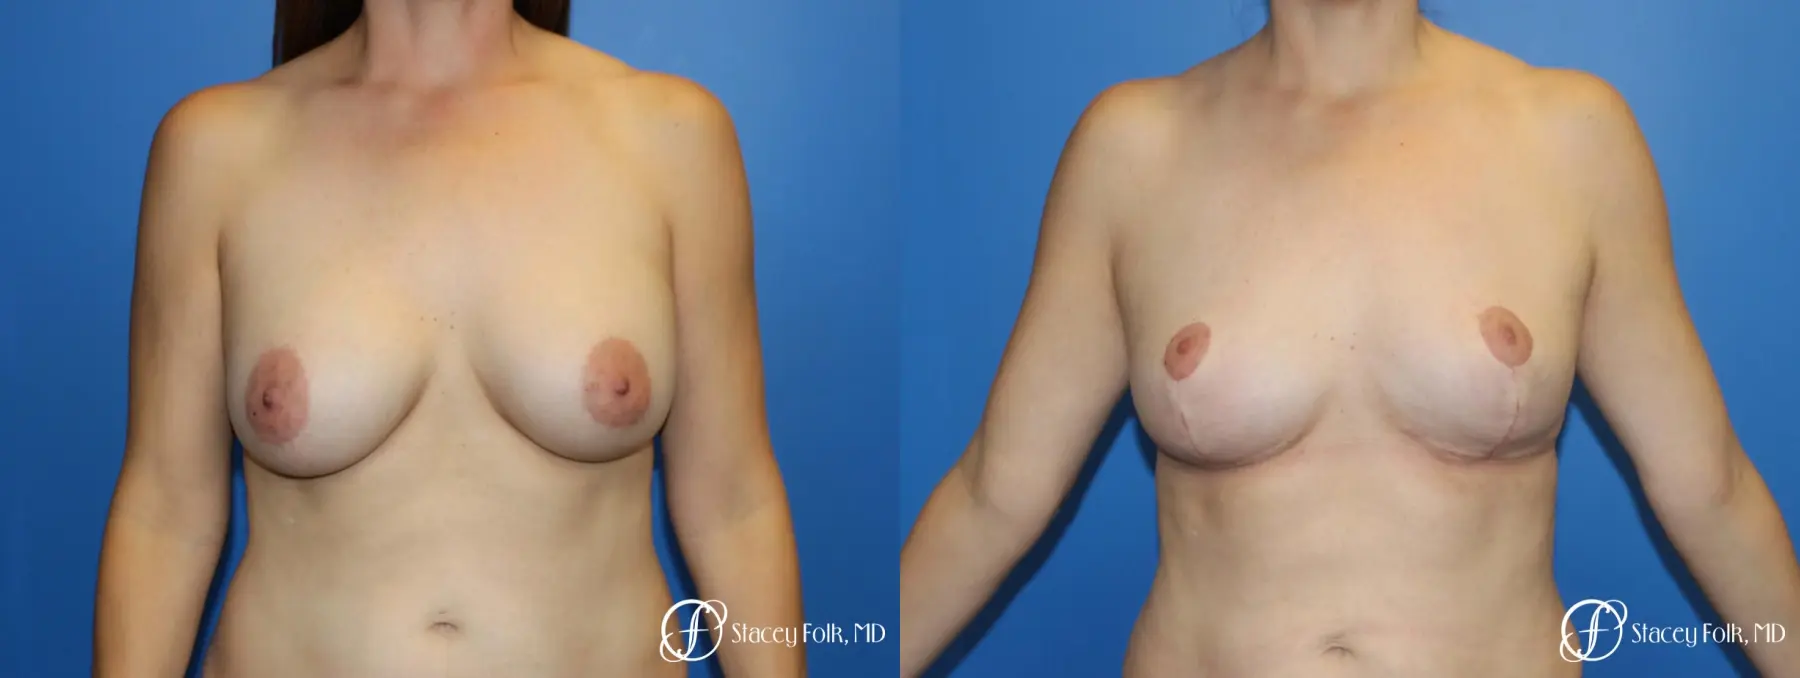 Fat Transfer Breast Lift (Mastopexy) - Before and After